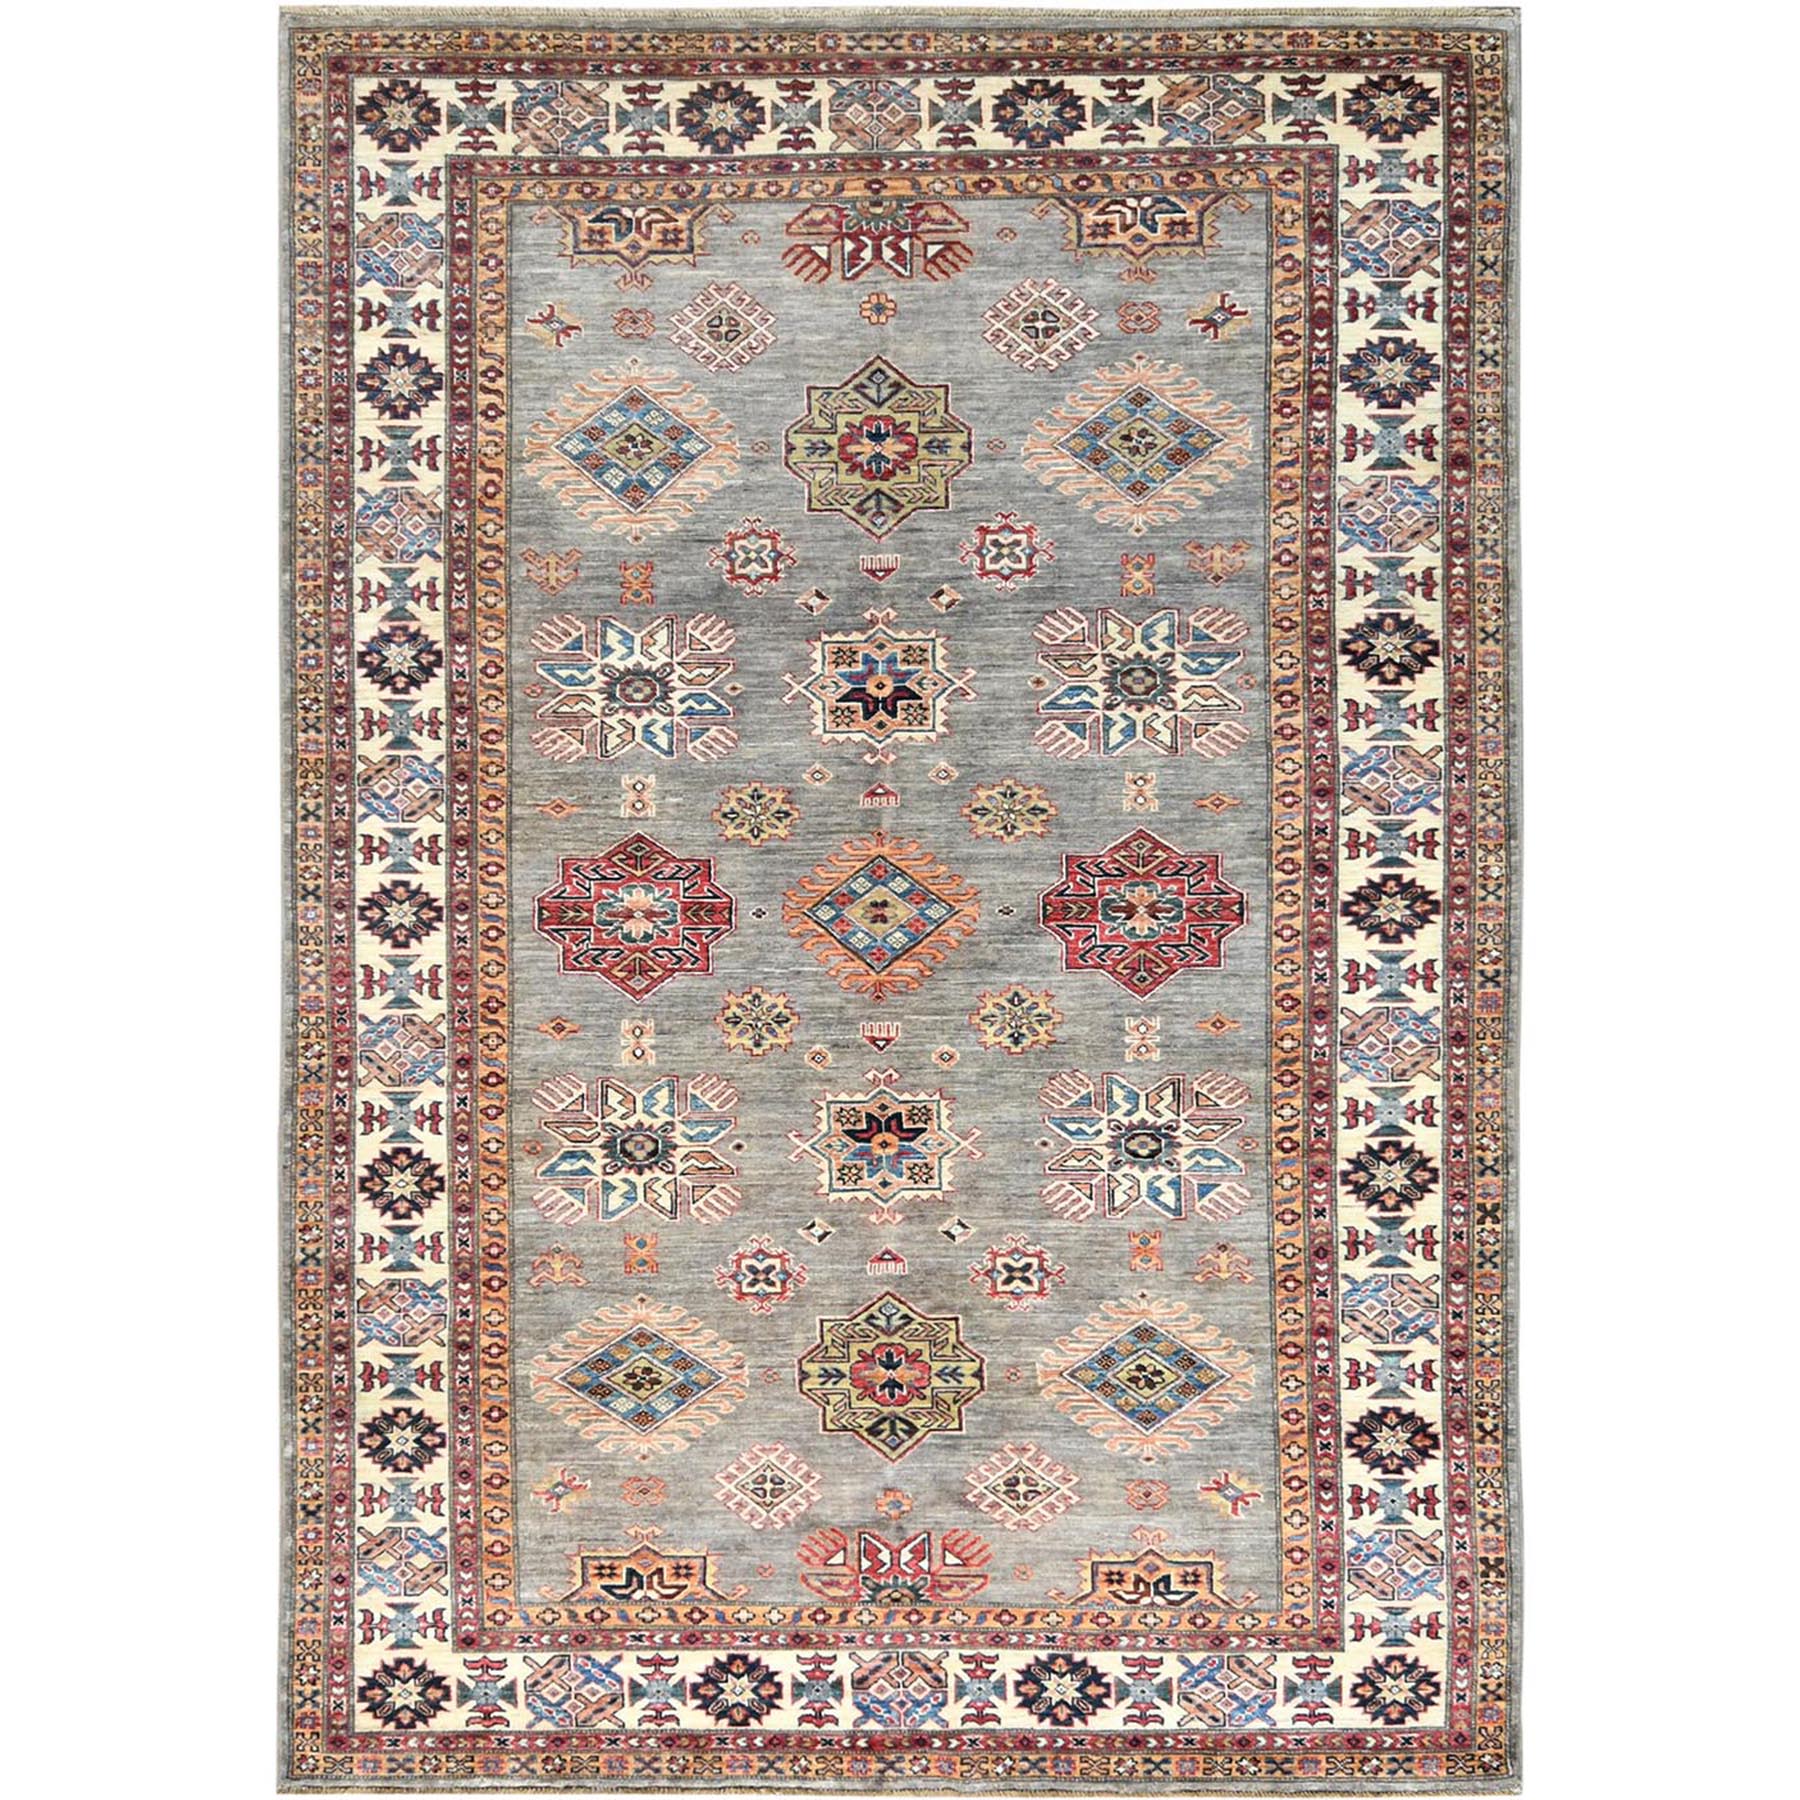  Wool Hand-Knotted Area Rug 6'3